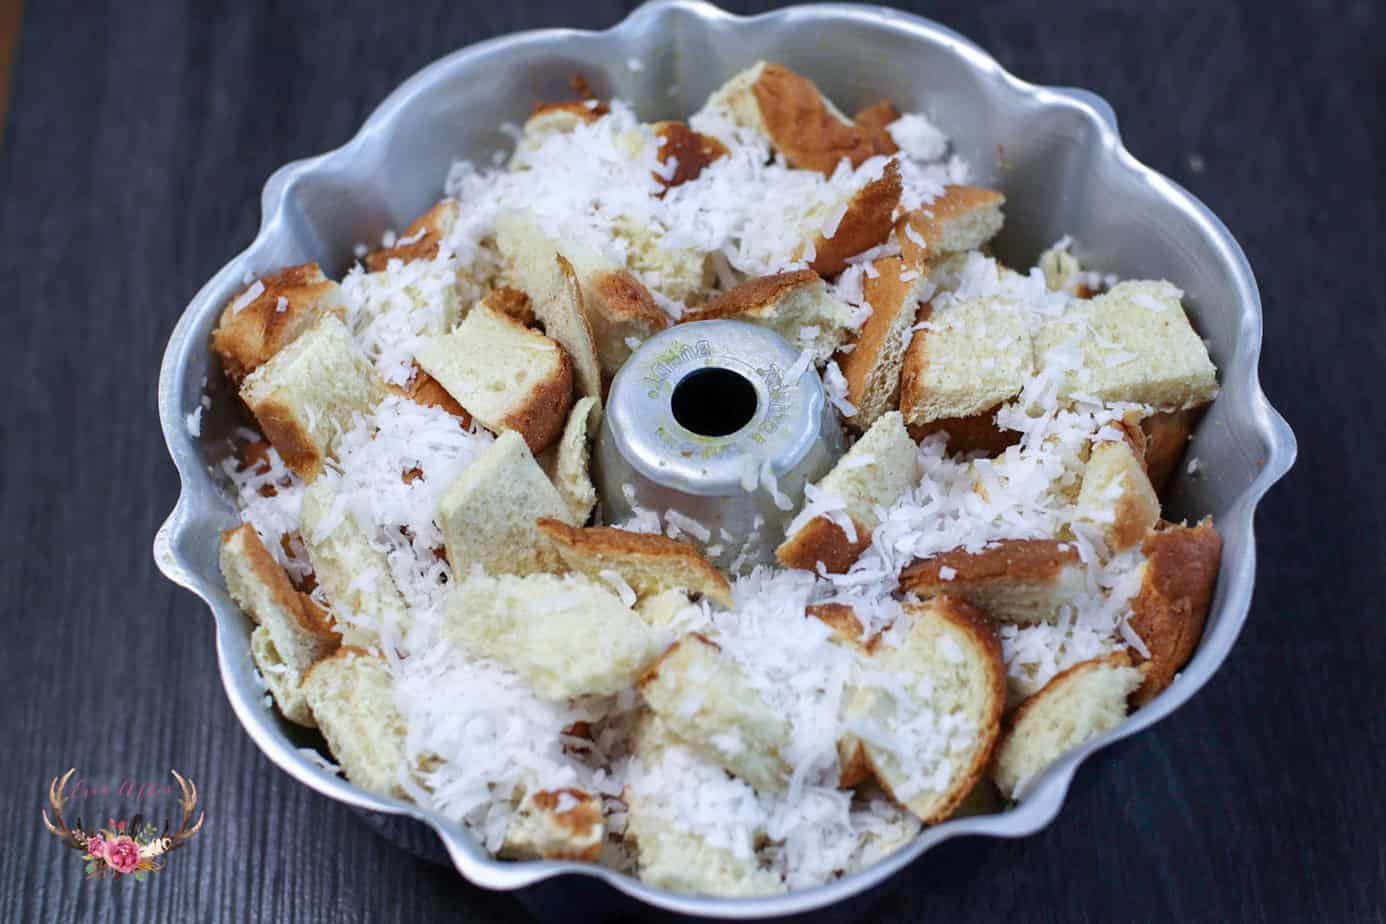 pina colada monkey bread with sweet rolls